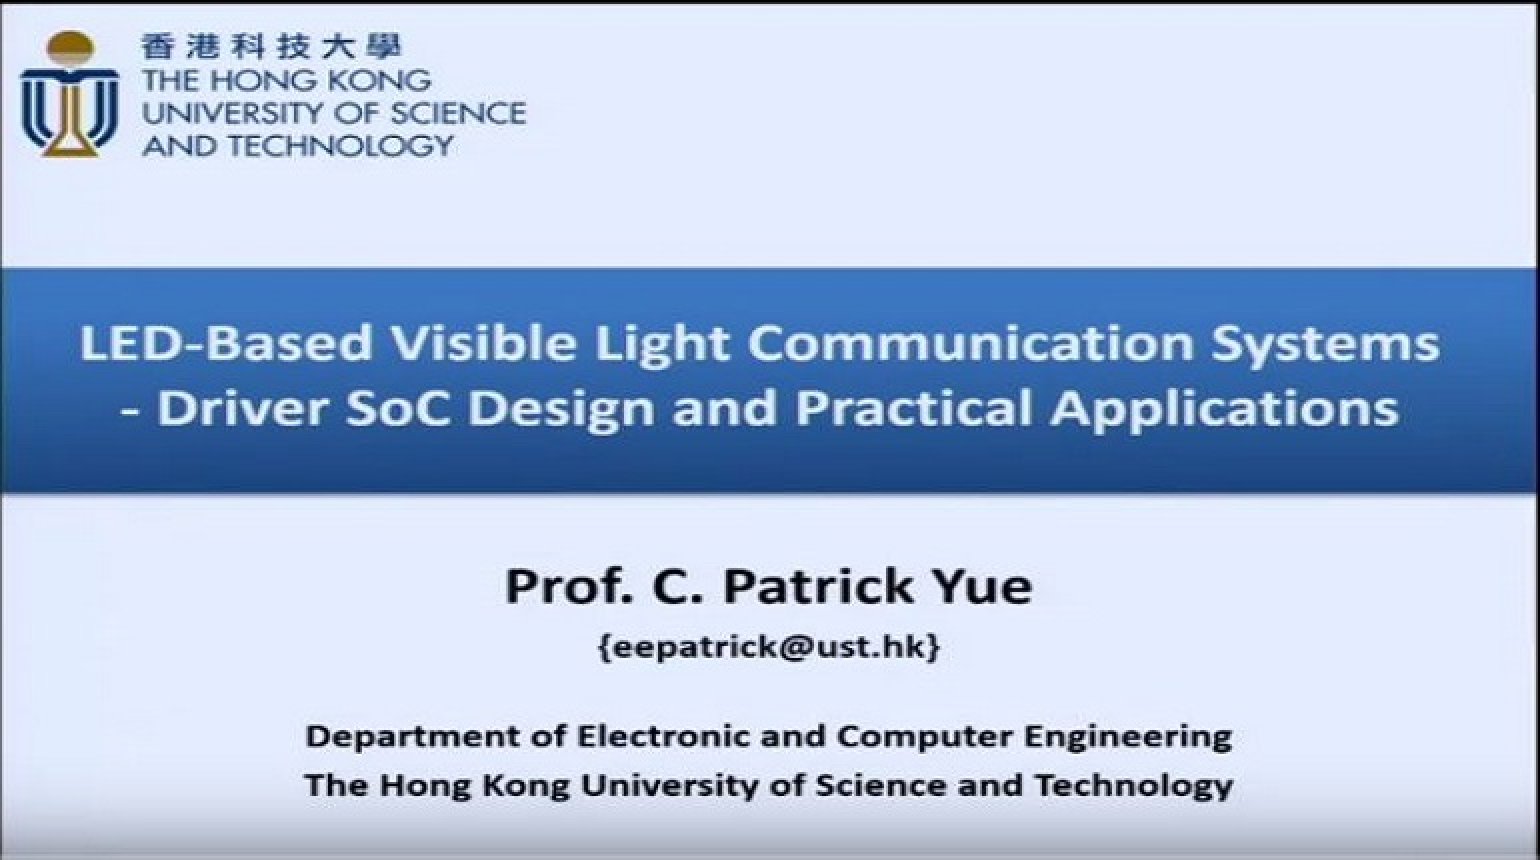 LED-Based Visible Light Communication Systems Driver SoC Design and Practical Applications Video